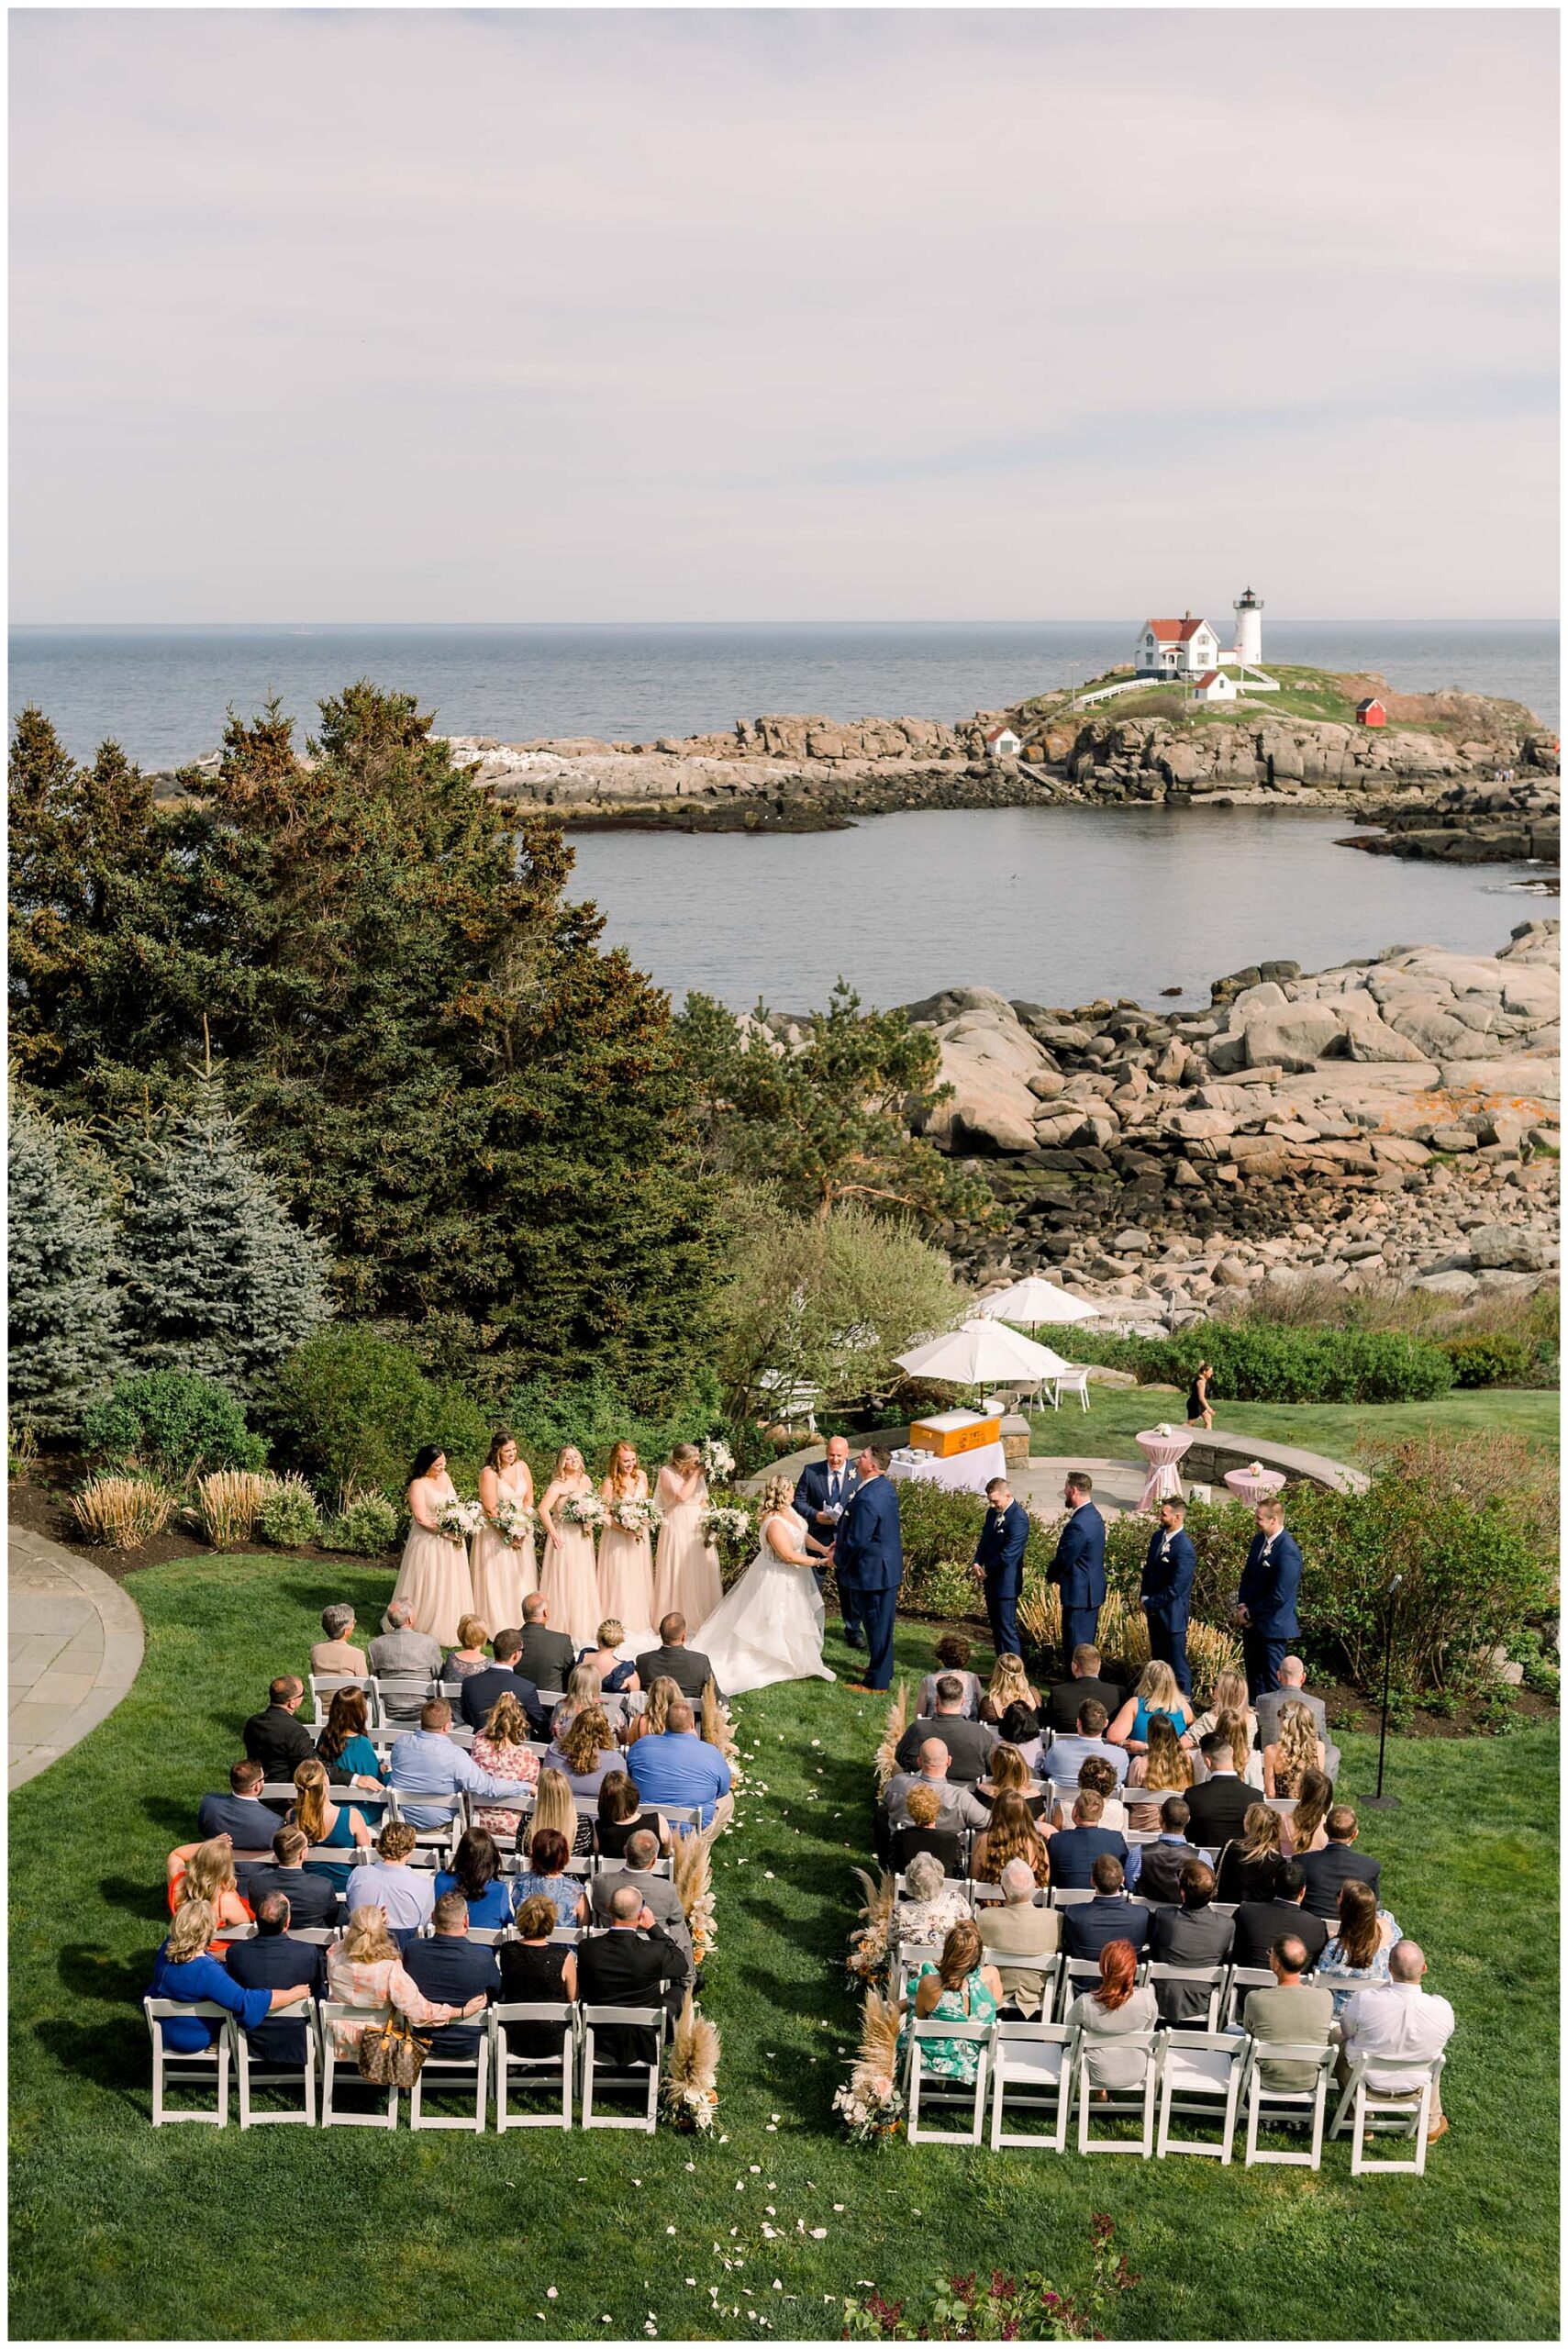 Birdseye view of viewpoint hotel wedding ceremony with Nubble Lighthouse in the distance.